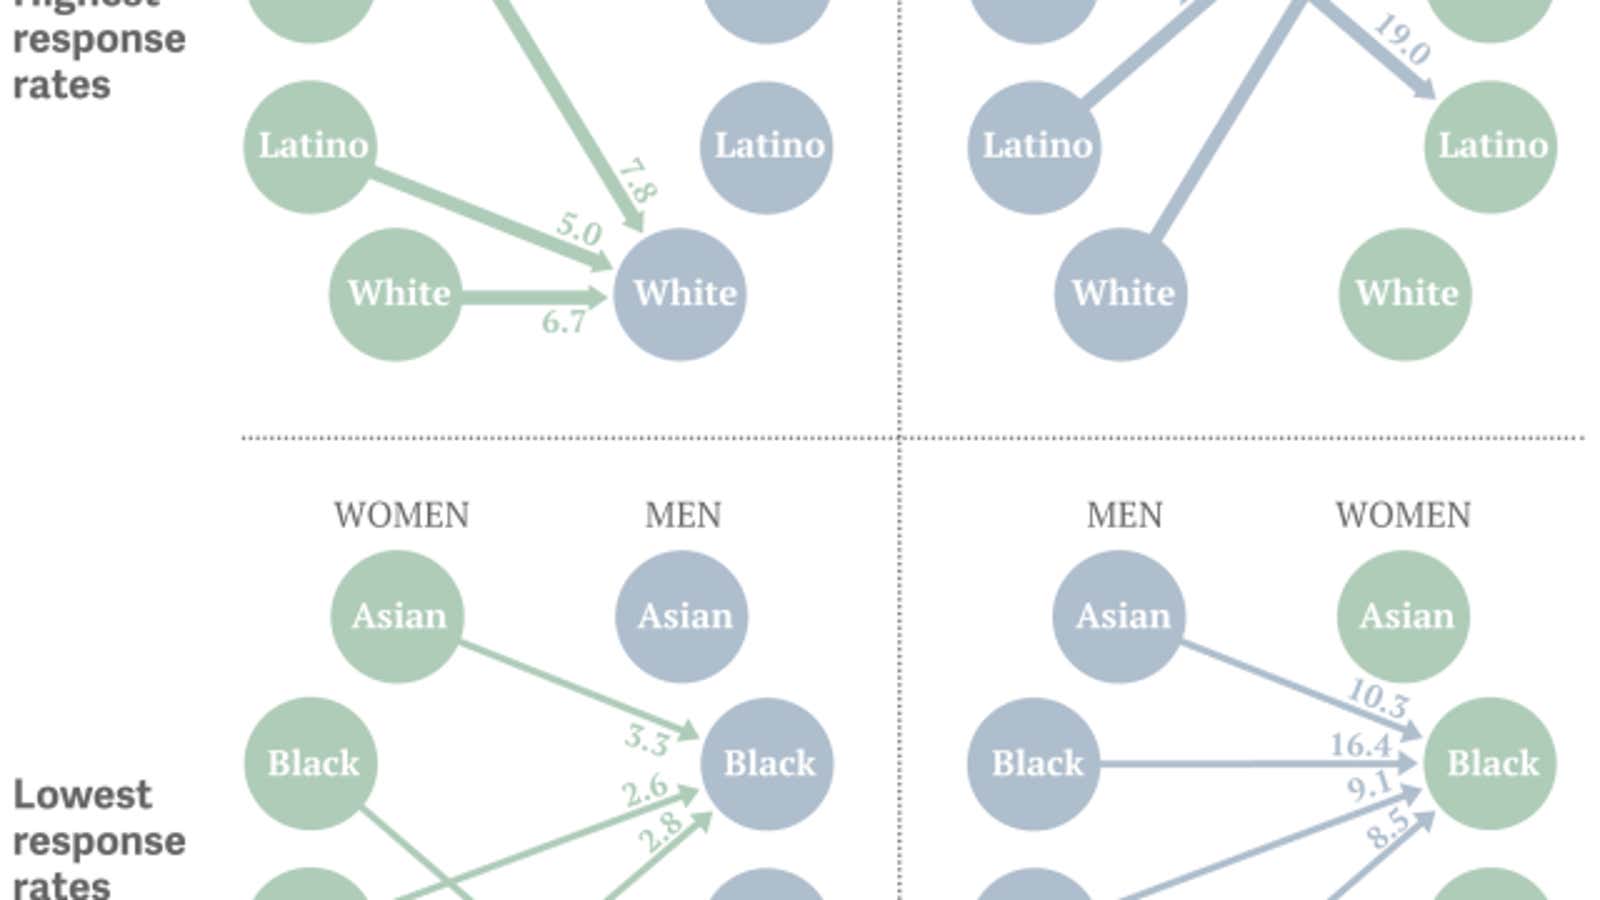 The uncomfortable racial preferences revealed by online dating